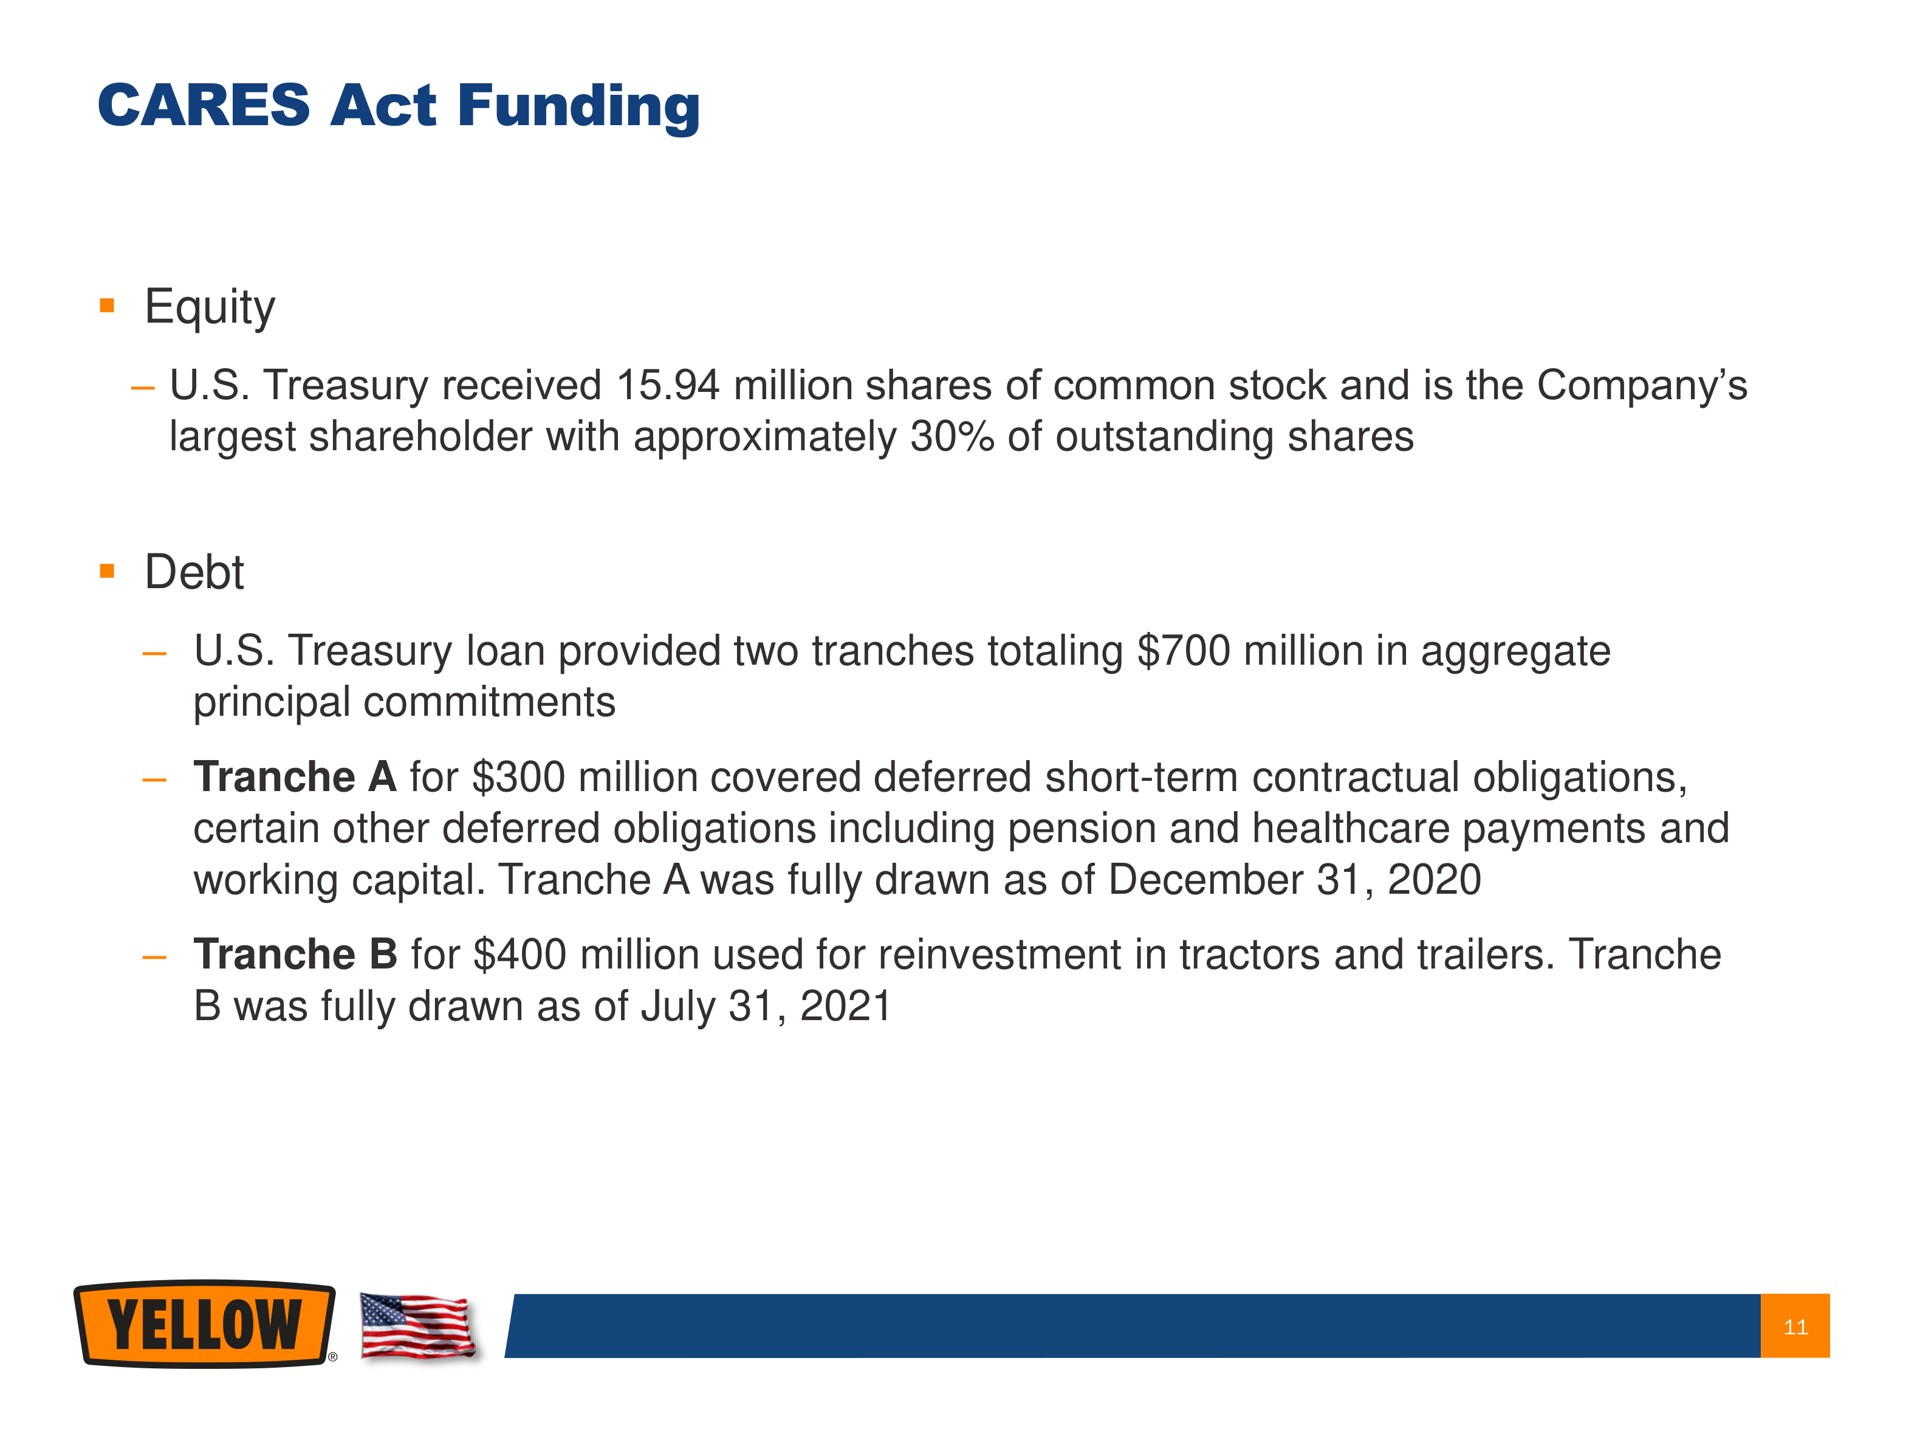 cares act funding equity treasury received million shares of common stock and is the company shareholder with approximately of outstanding shares debt treasury loan provided two totaling million in aggregate principal commitments a for million covered deferred short term contractual obligations certain other deferred obligations including pension and payments and working capital a was fully drawn as of for million used for reinvestment in tractors and trailers was fully drawn as of | Yellow Corporation